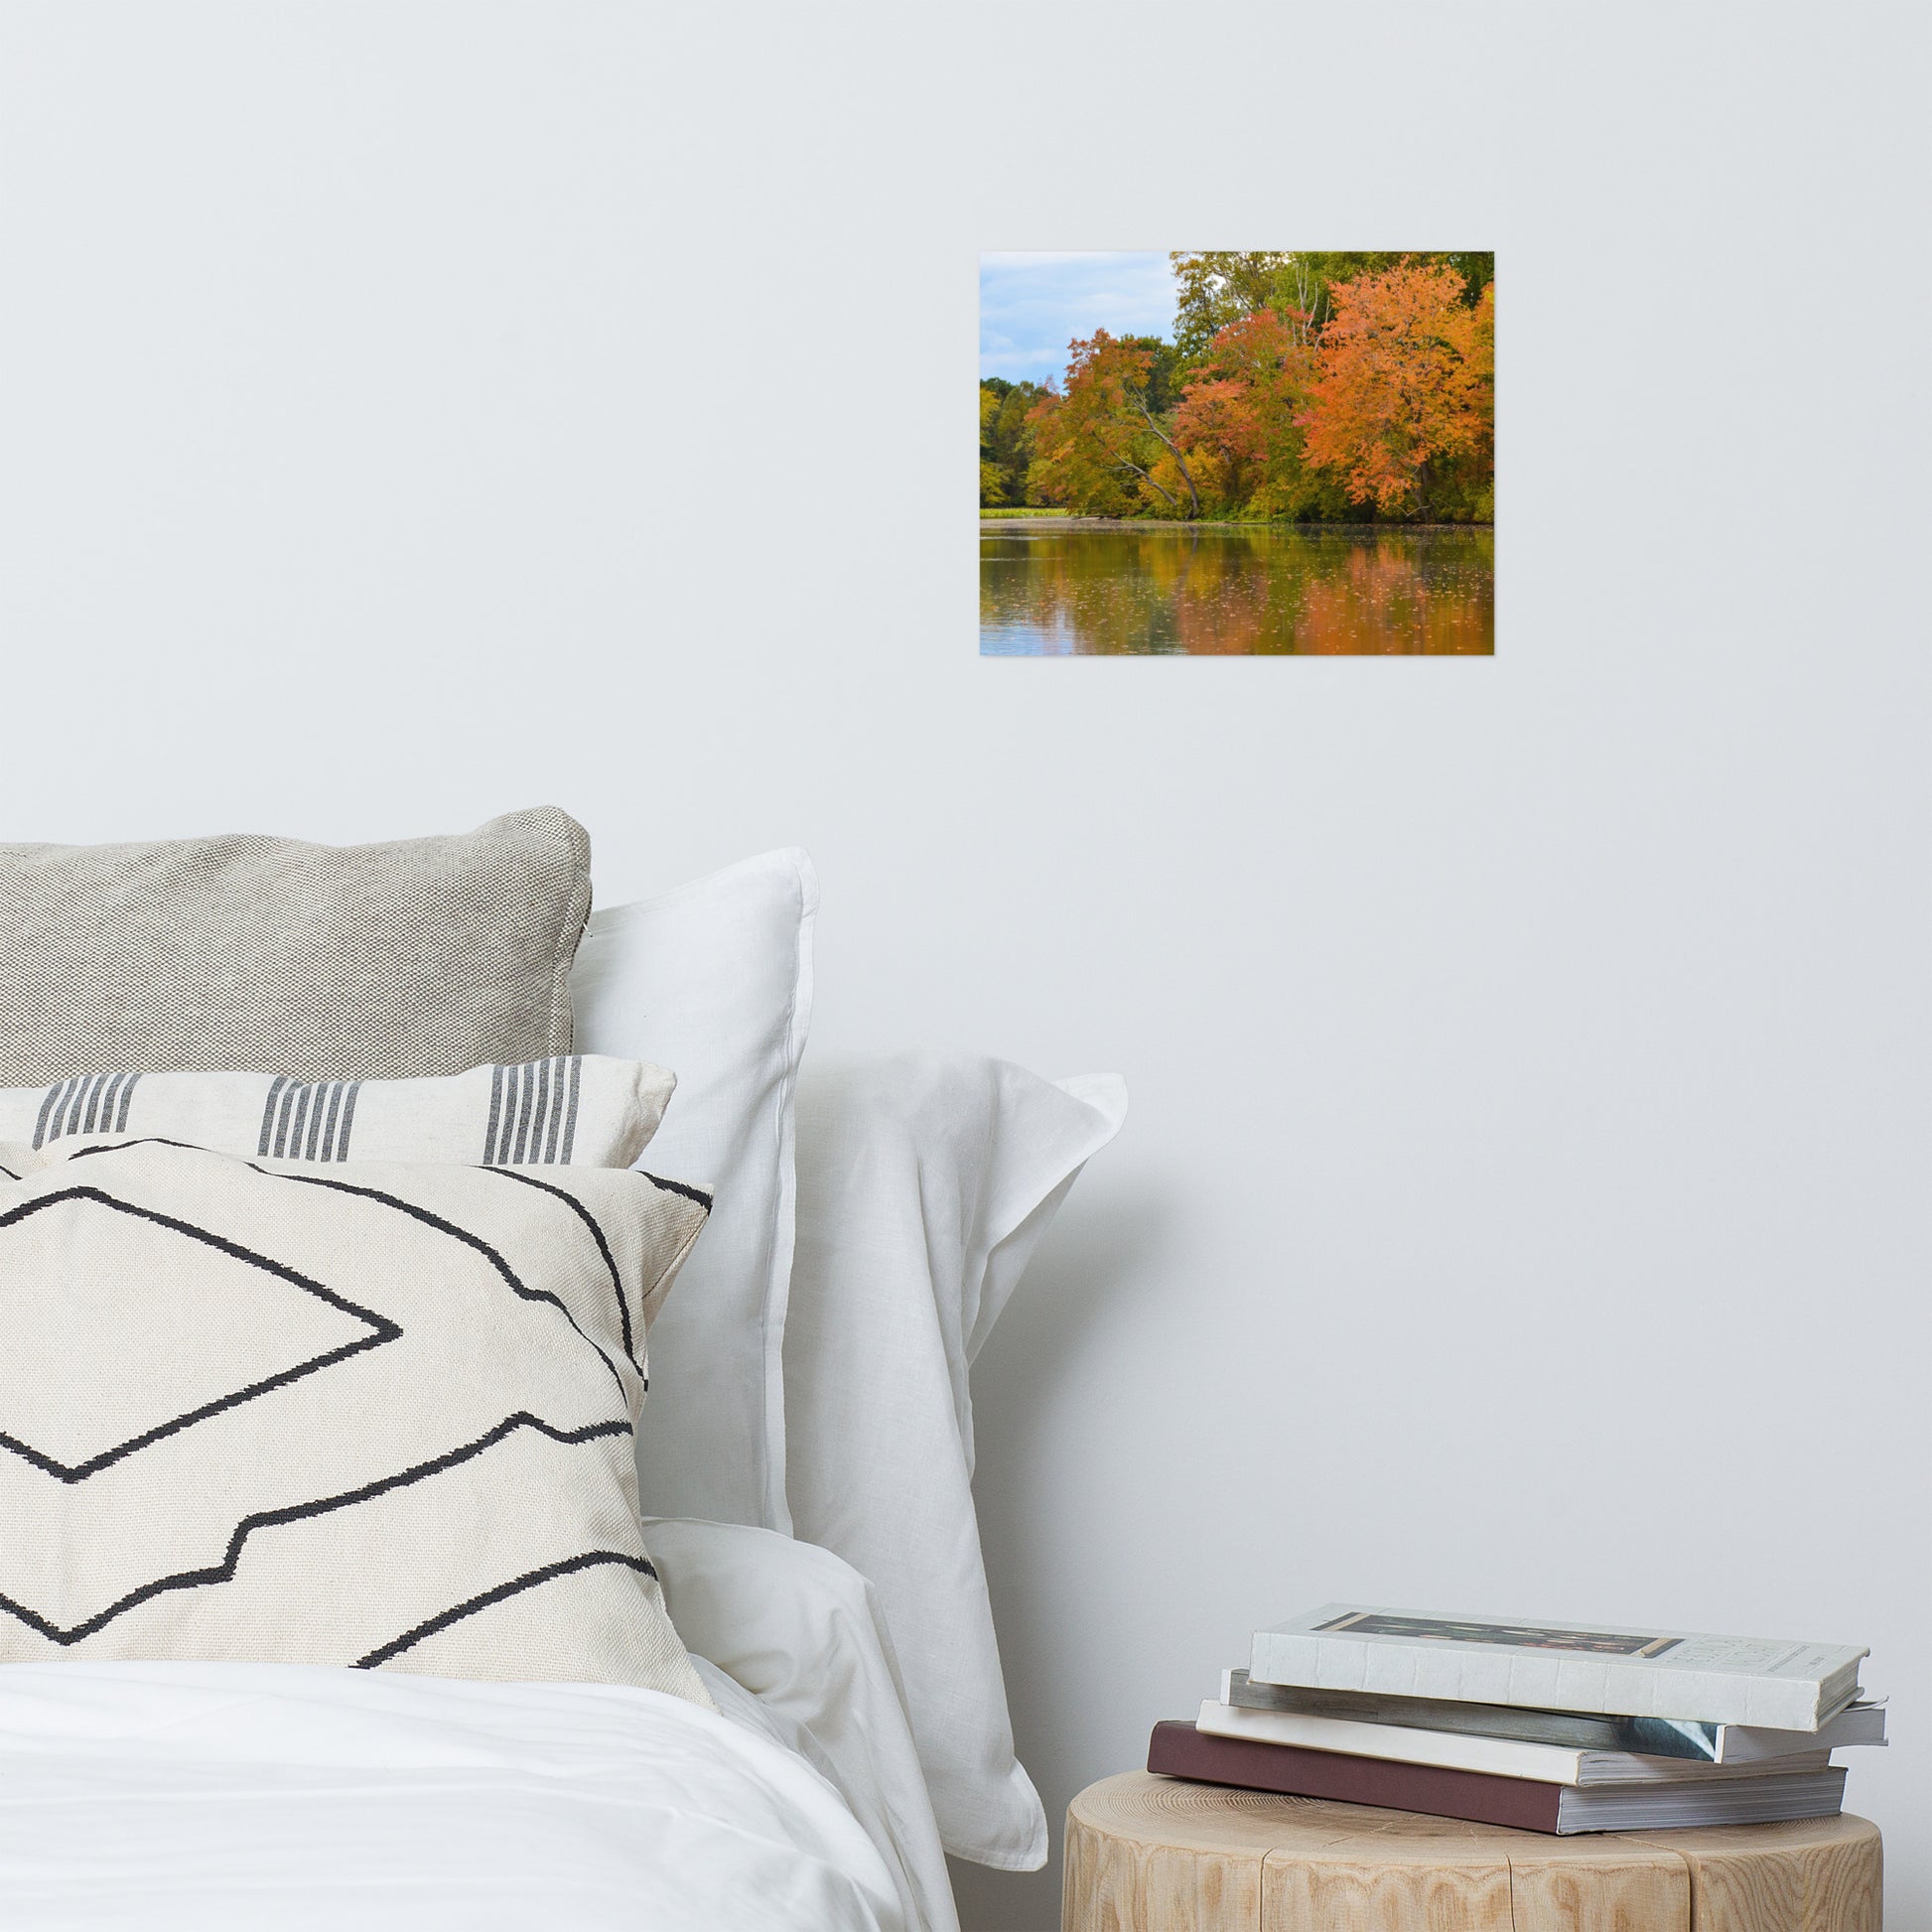 Apartment Bedroom Wall Decor: Colorful Trees in Fall Color Edge of Pond - Rural / Country Style Landscape / Nature Loose / Unframed / Frameless / Frameable Photograph Wall Art Print - Artwork